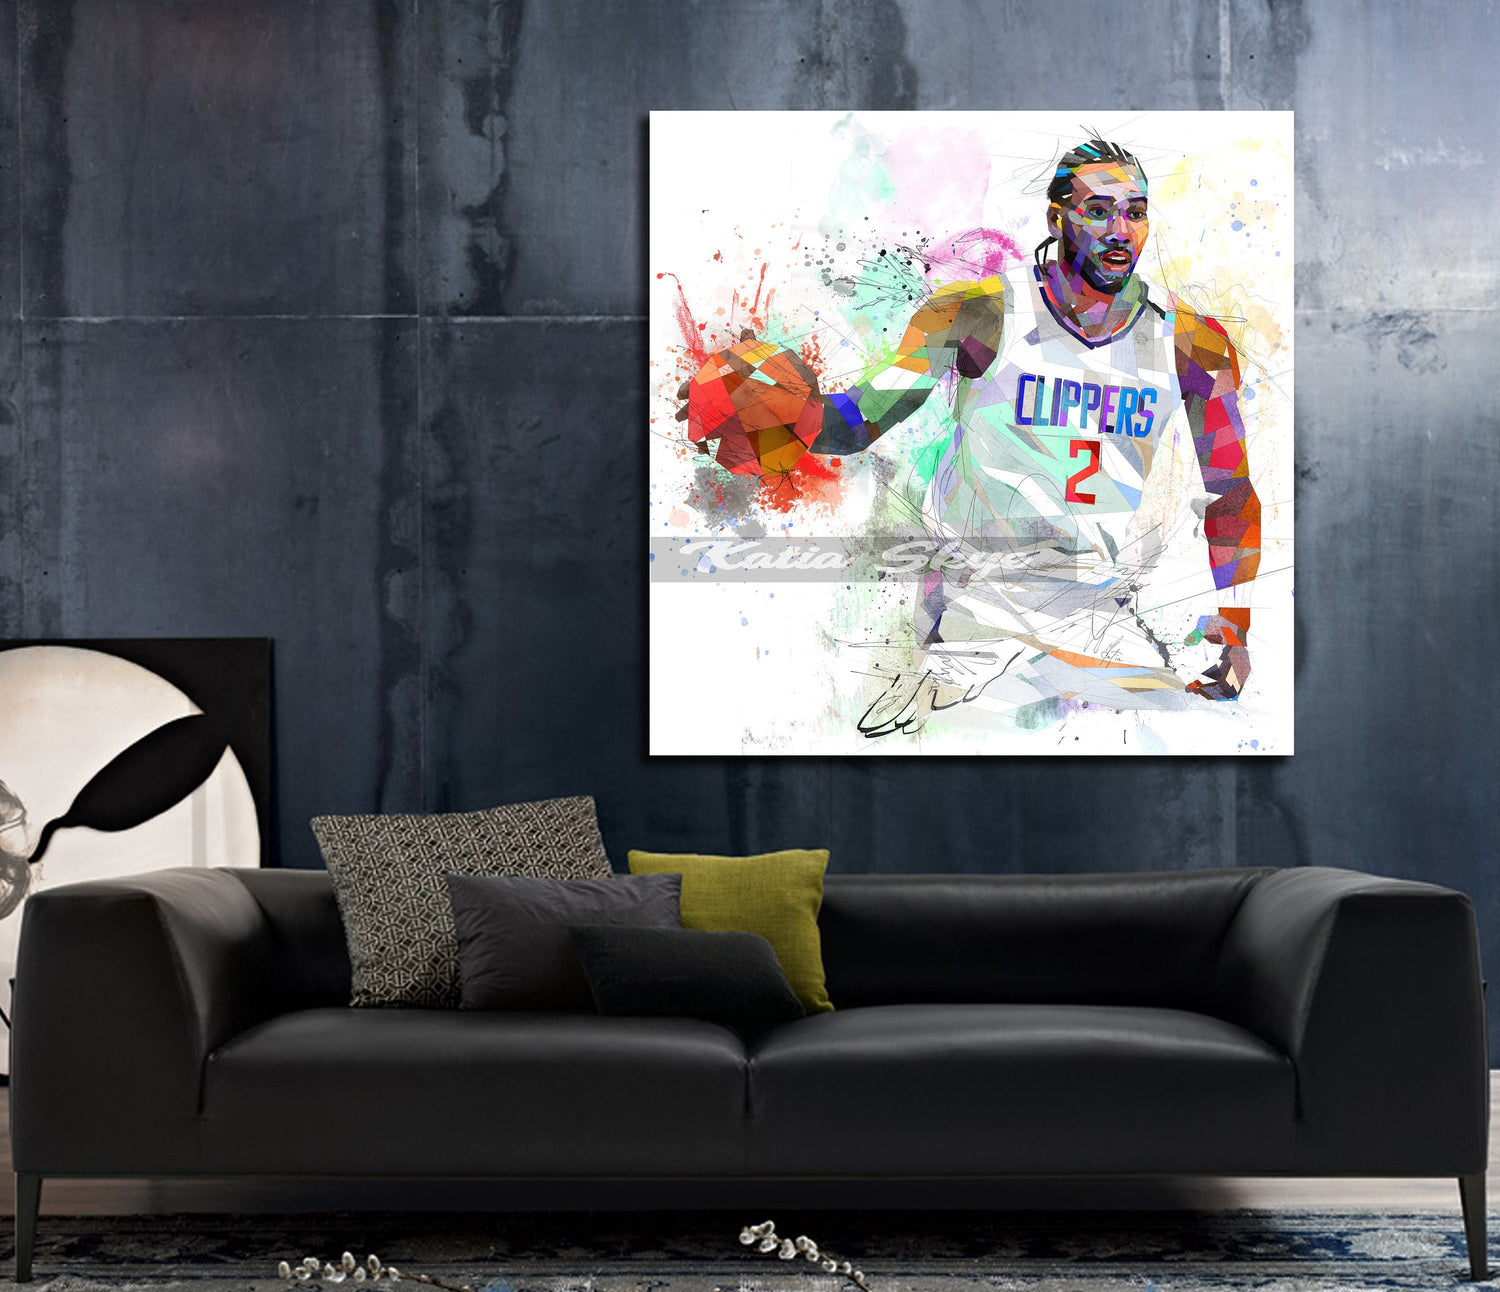 Los Angeles Clippers posters